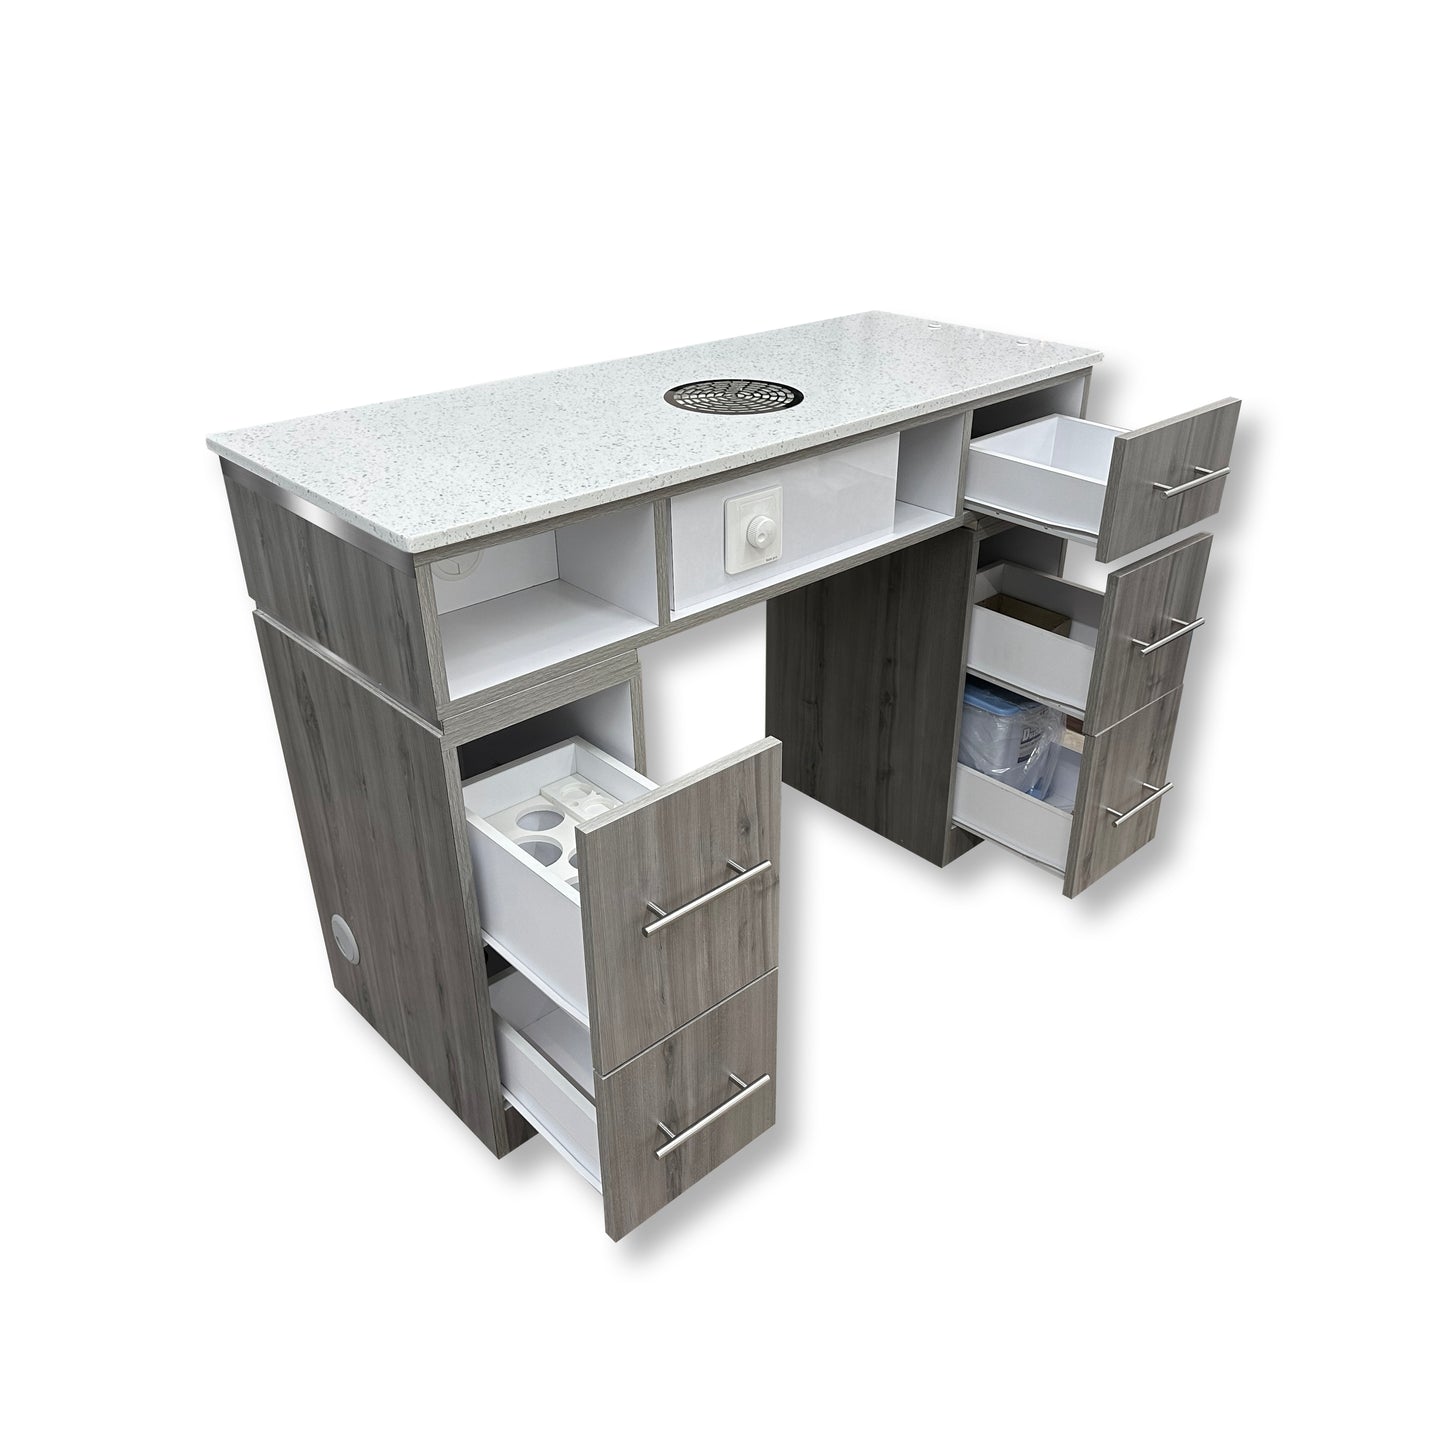 Abalone Grey Single Nail Table with build-in Air filter system